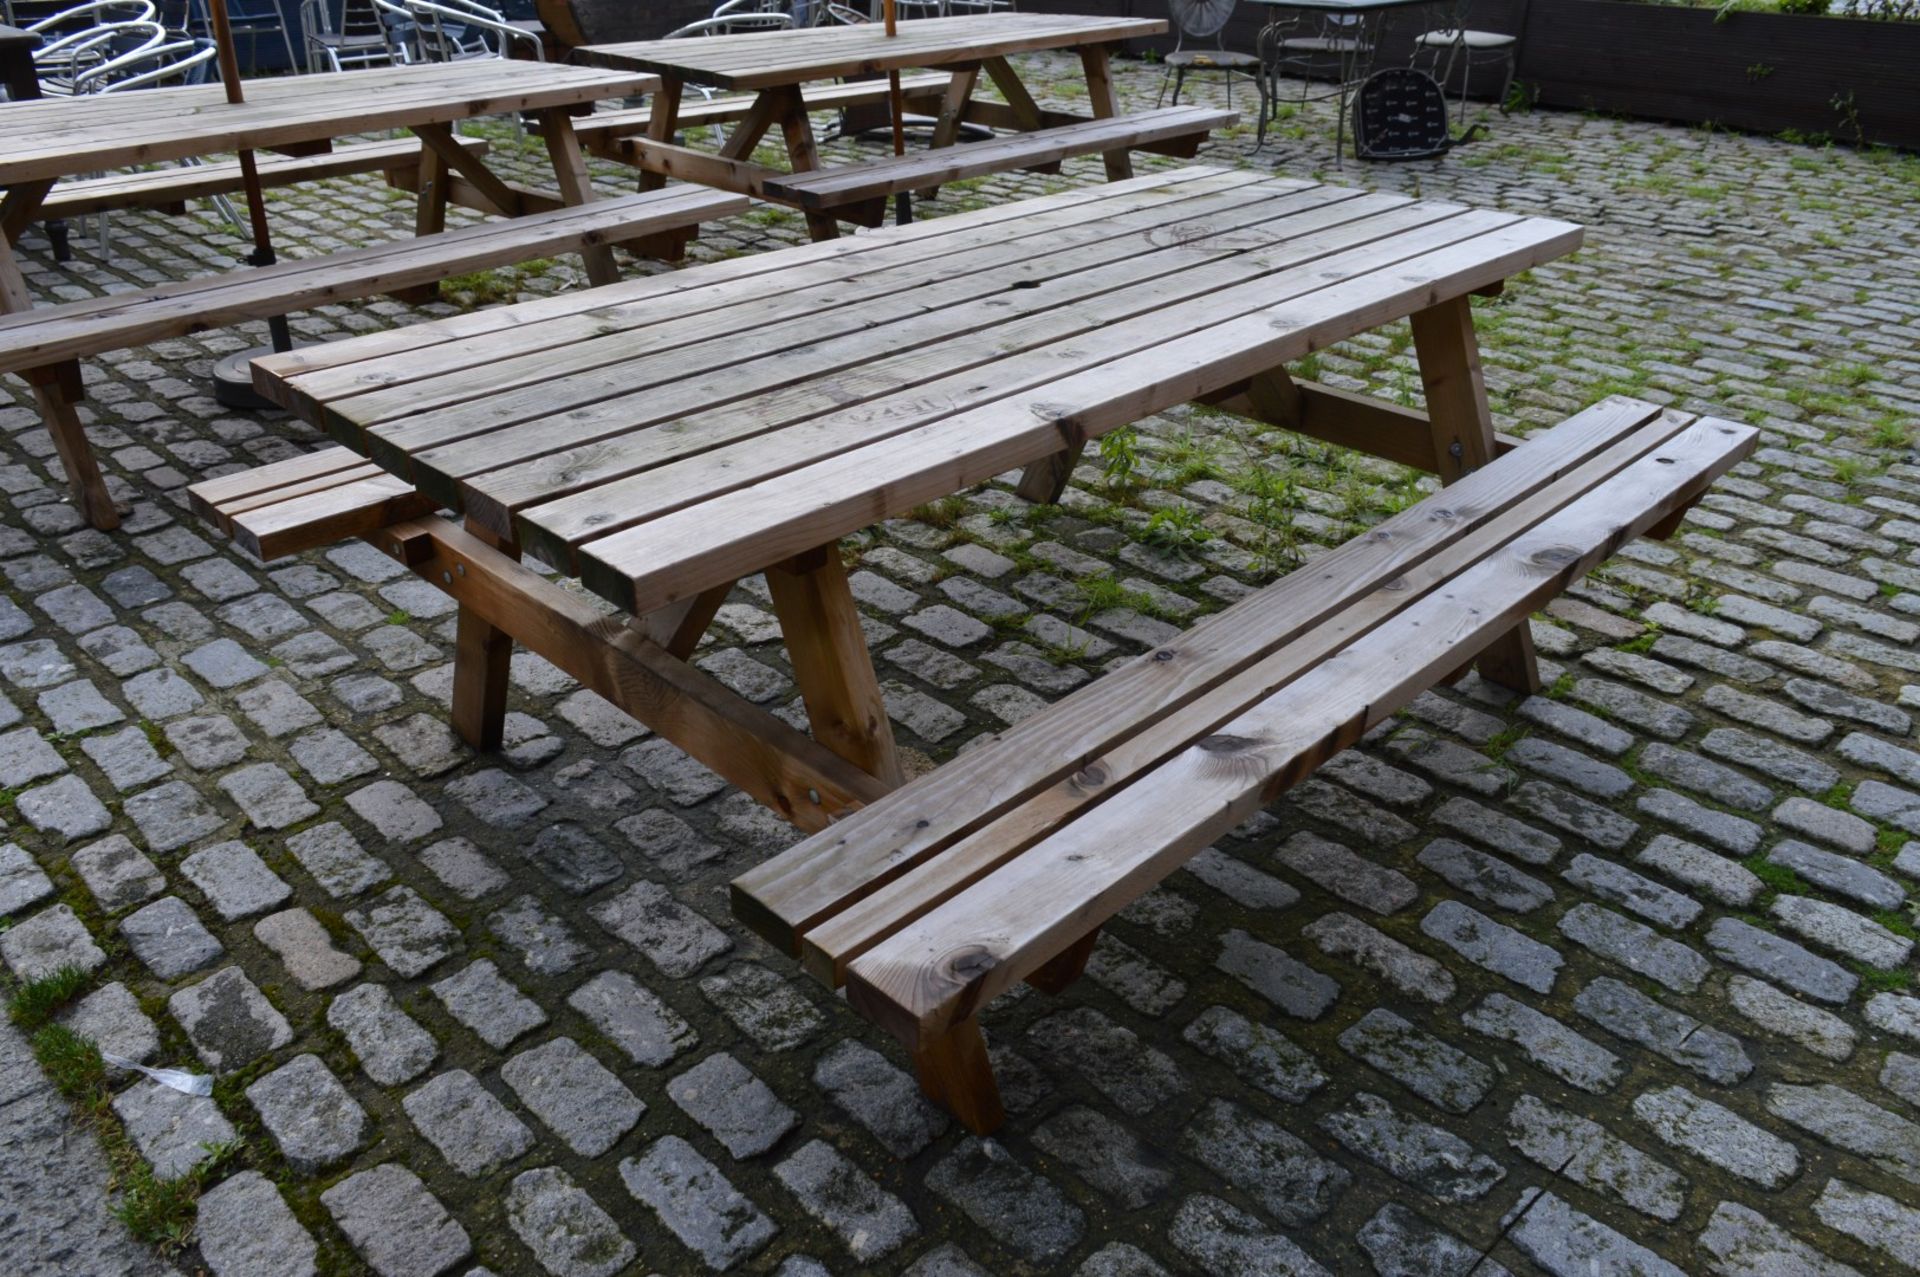 1 x Pub Garden Picnic Table With Attached Benches - For Heavy Duty Commercial Use - Manufactured - Image 2 of 3